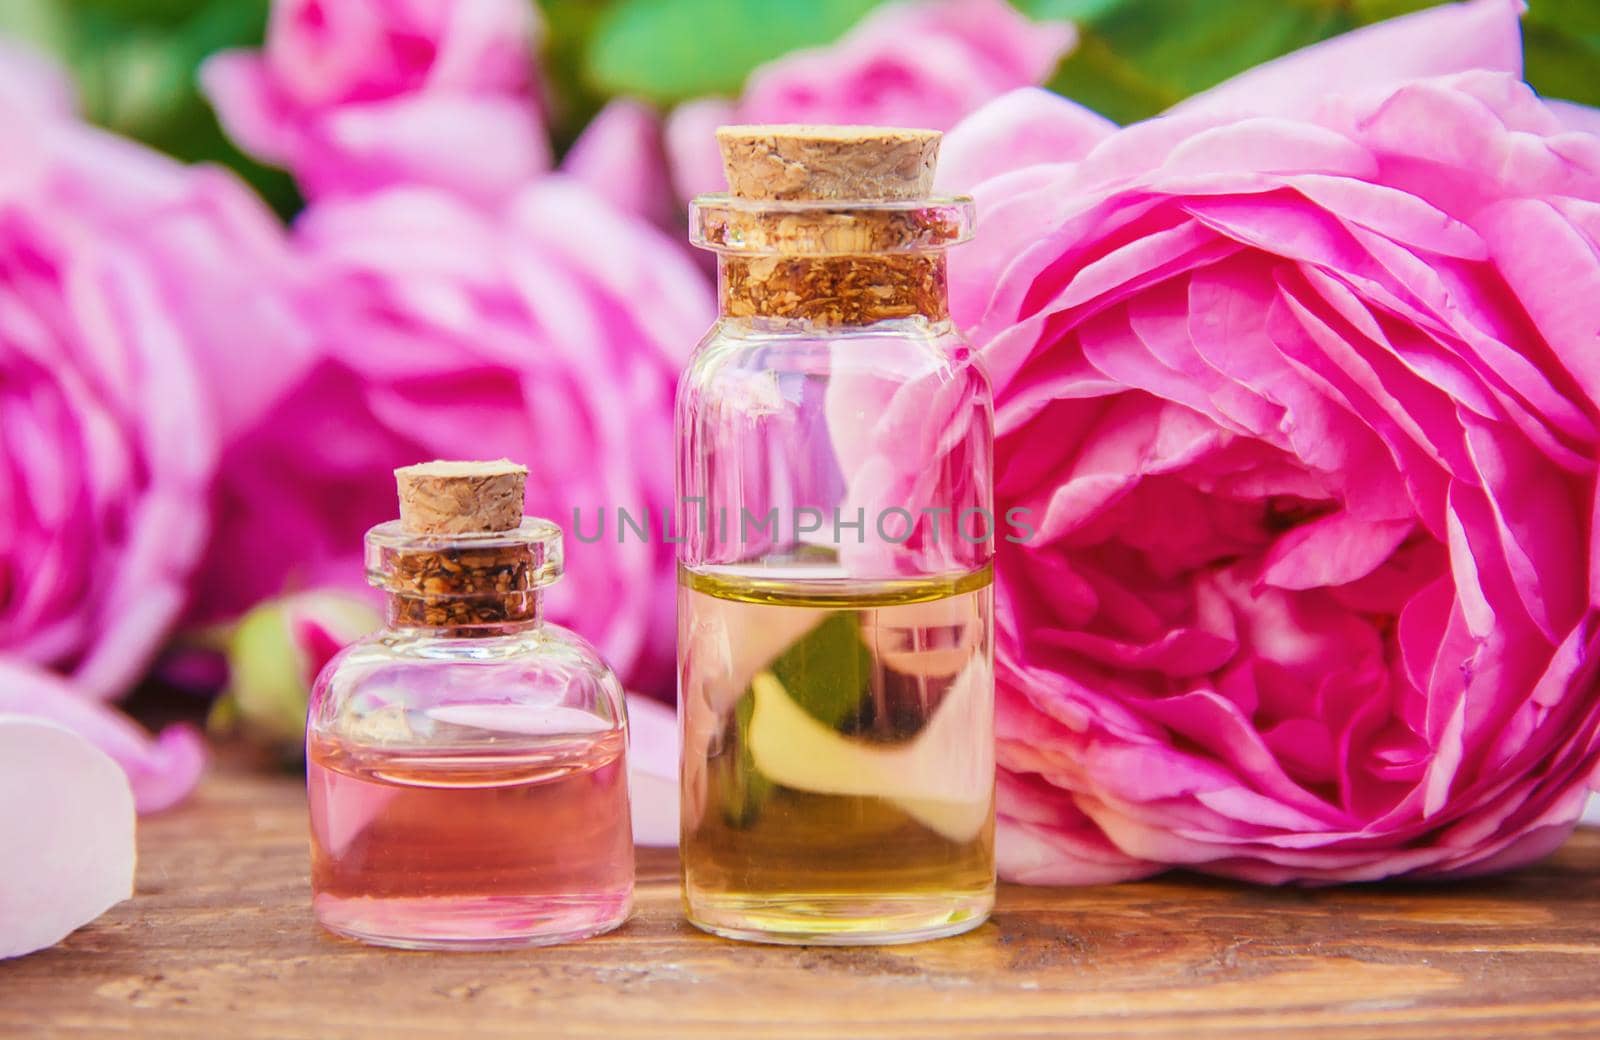 Essential oil of rose on a light background. Selective focus.